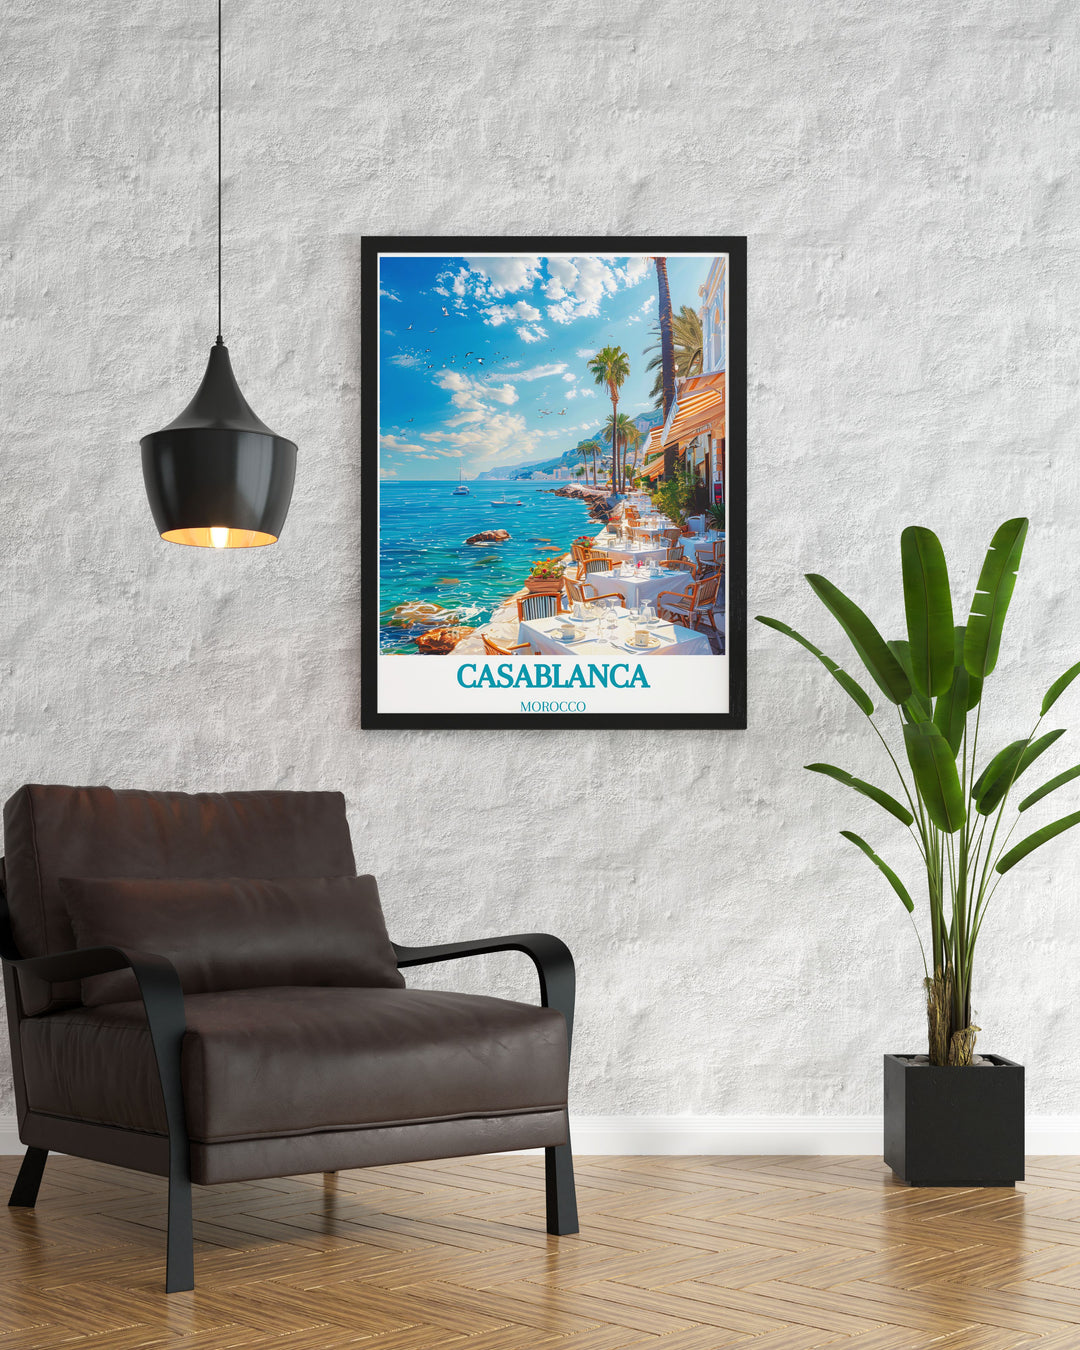 Decorative Casablanca artwork featuring the majestic Hassan II Mosque against a sunset, bringing Moroccan beauty into your living space.